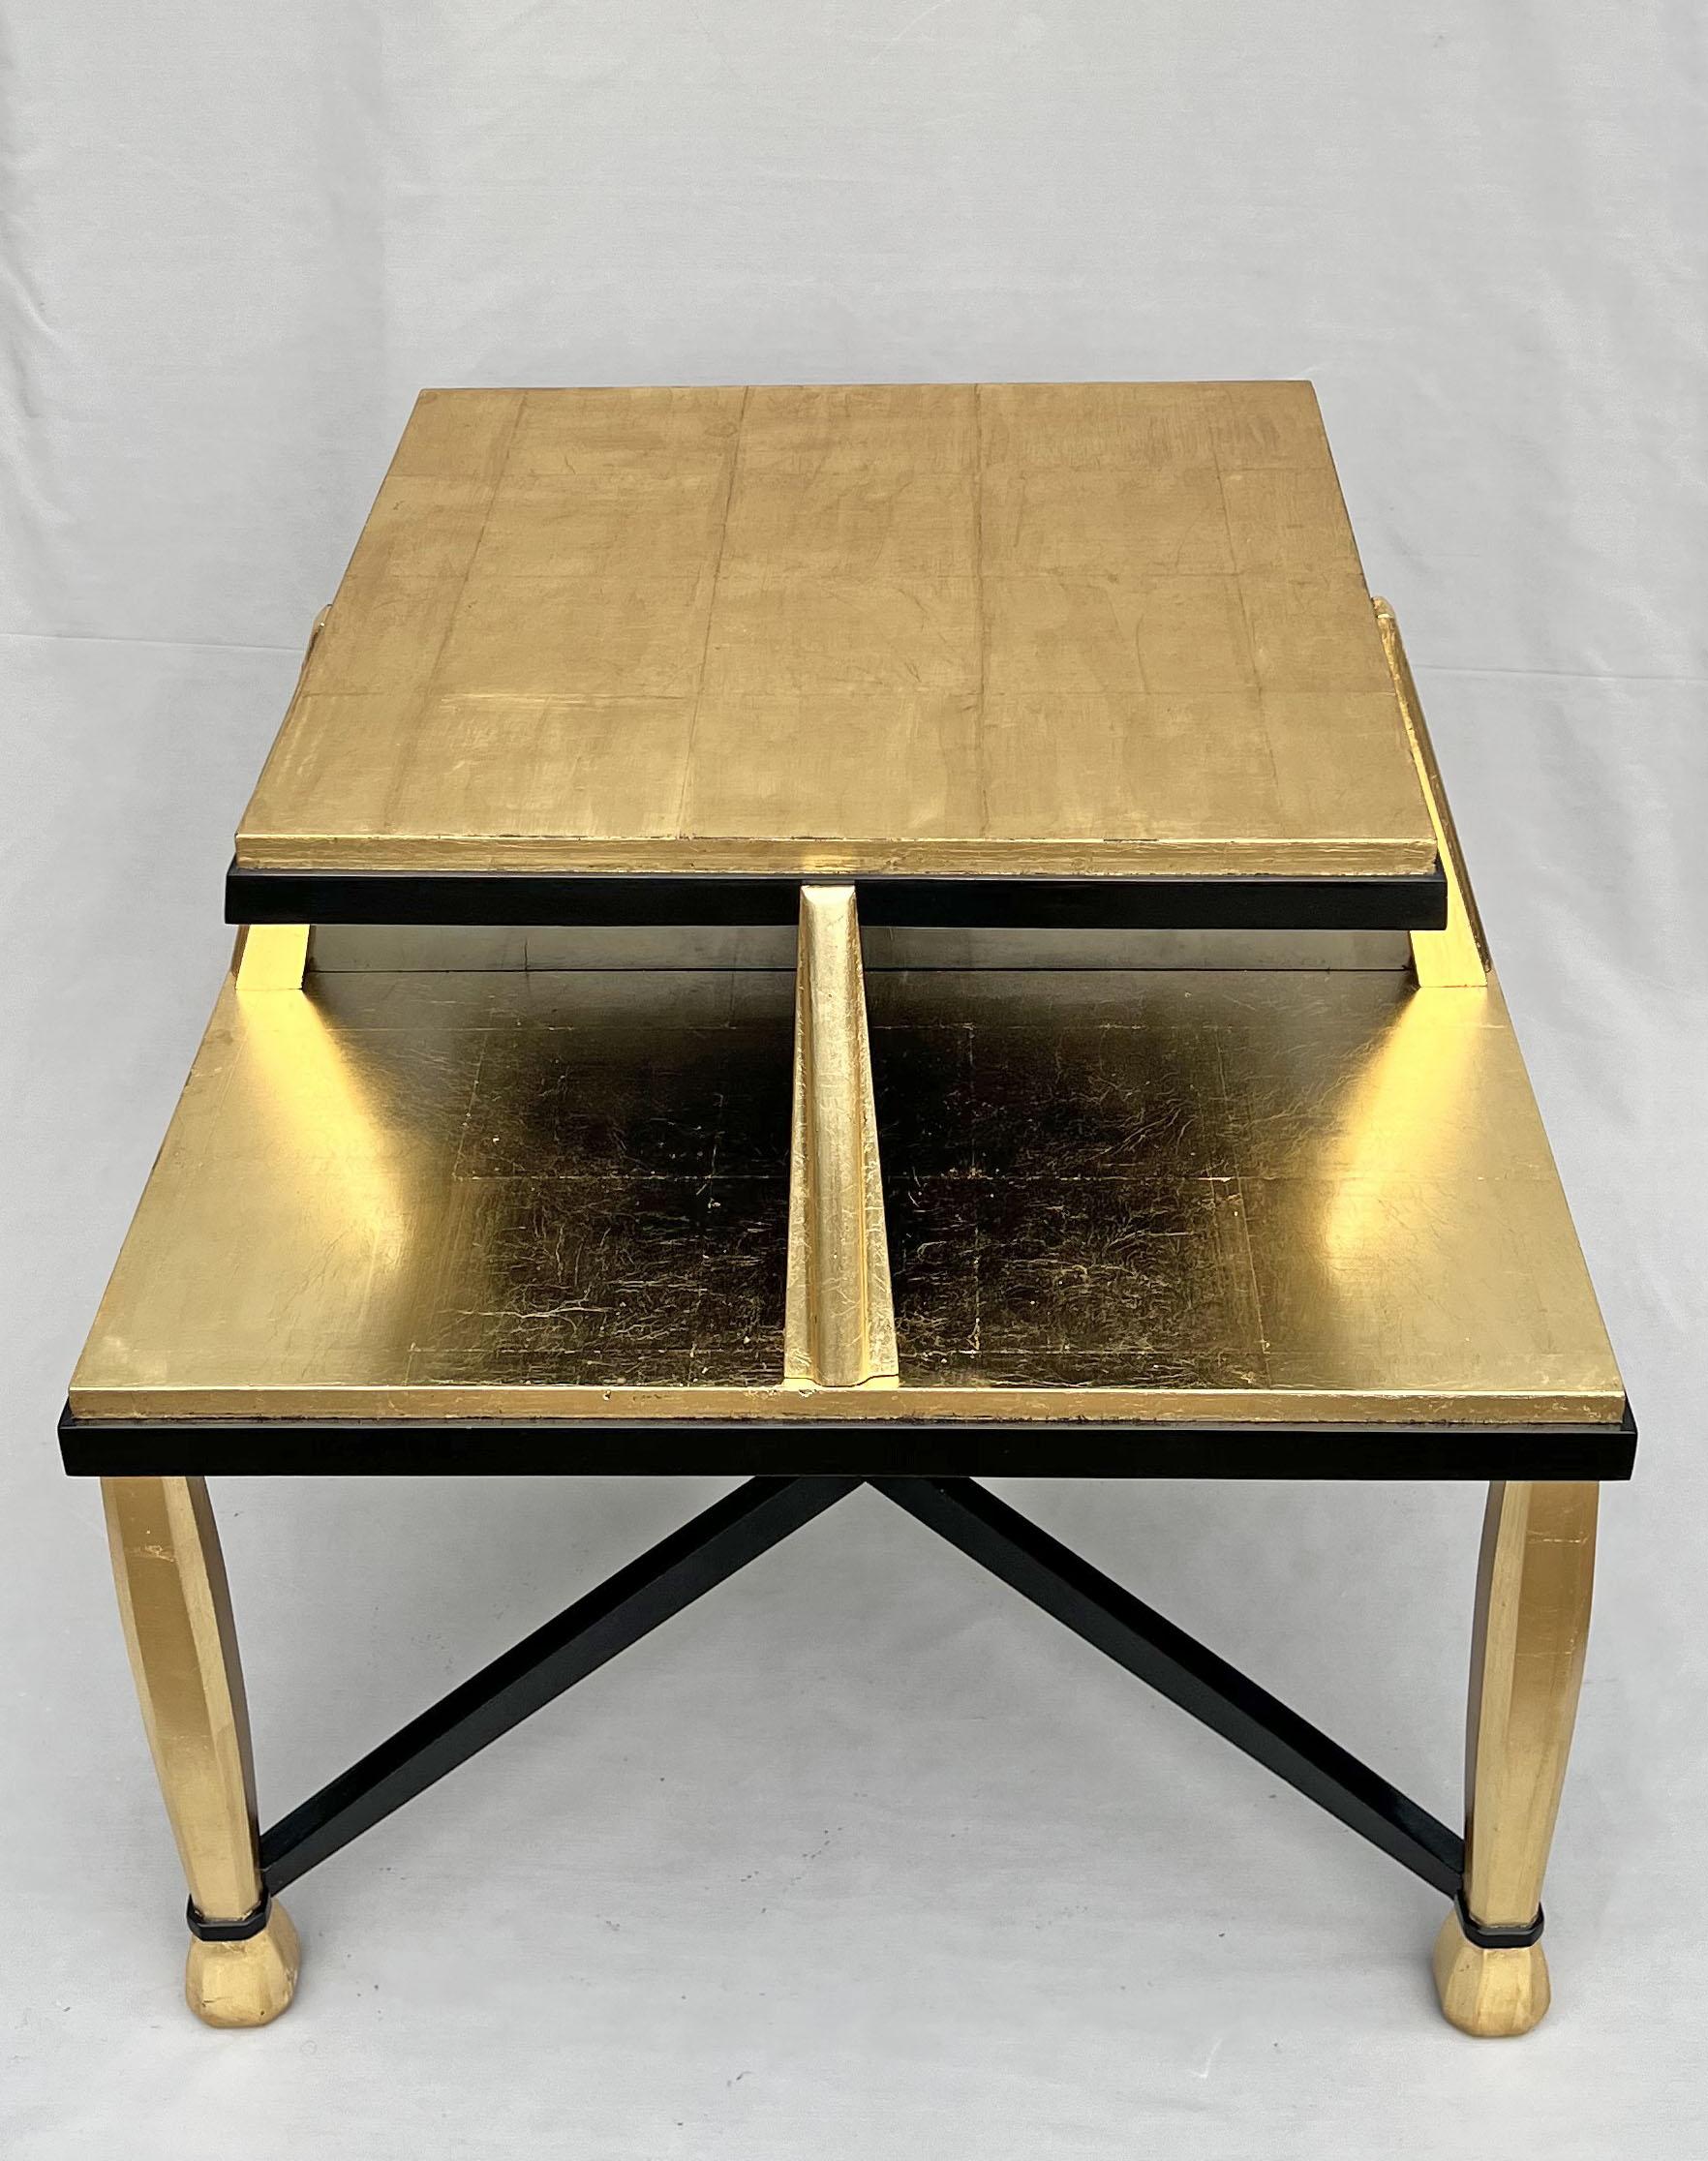 European Art Deco Coffee Table in Giltwood and Black Lacquer, 1930s For Sale